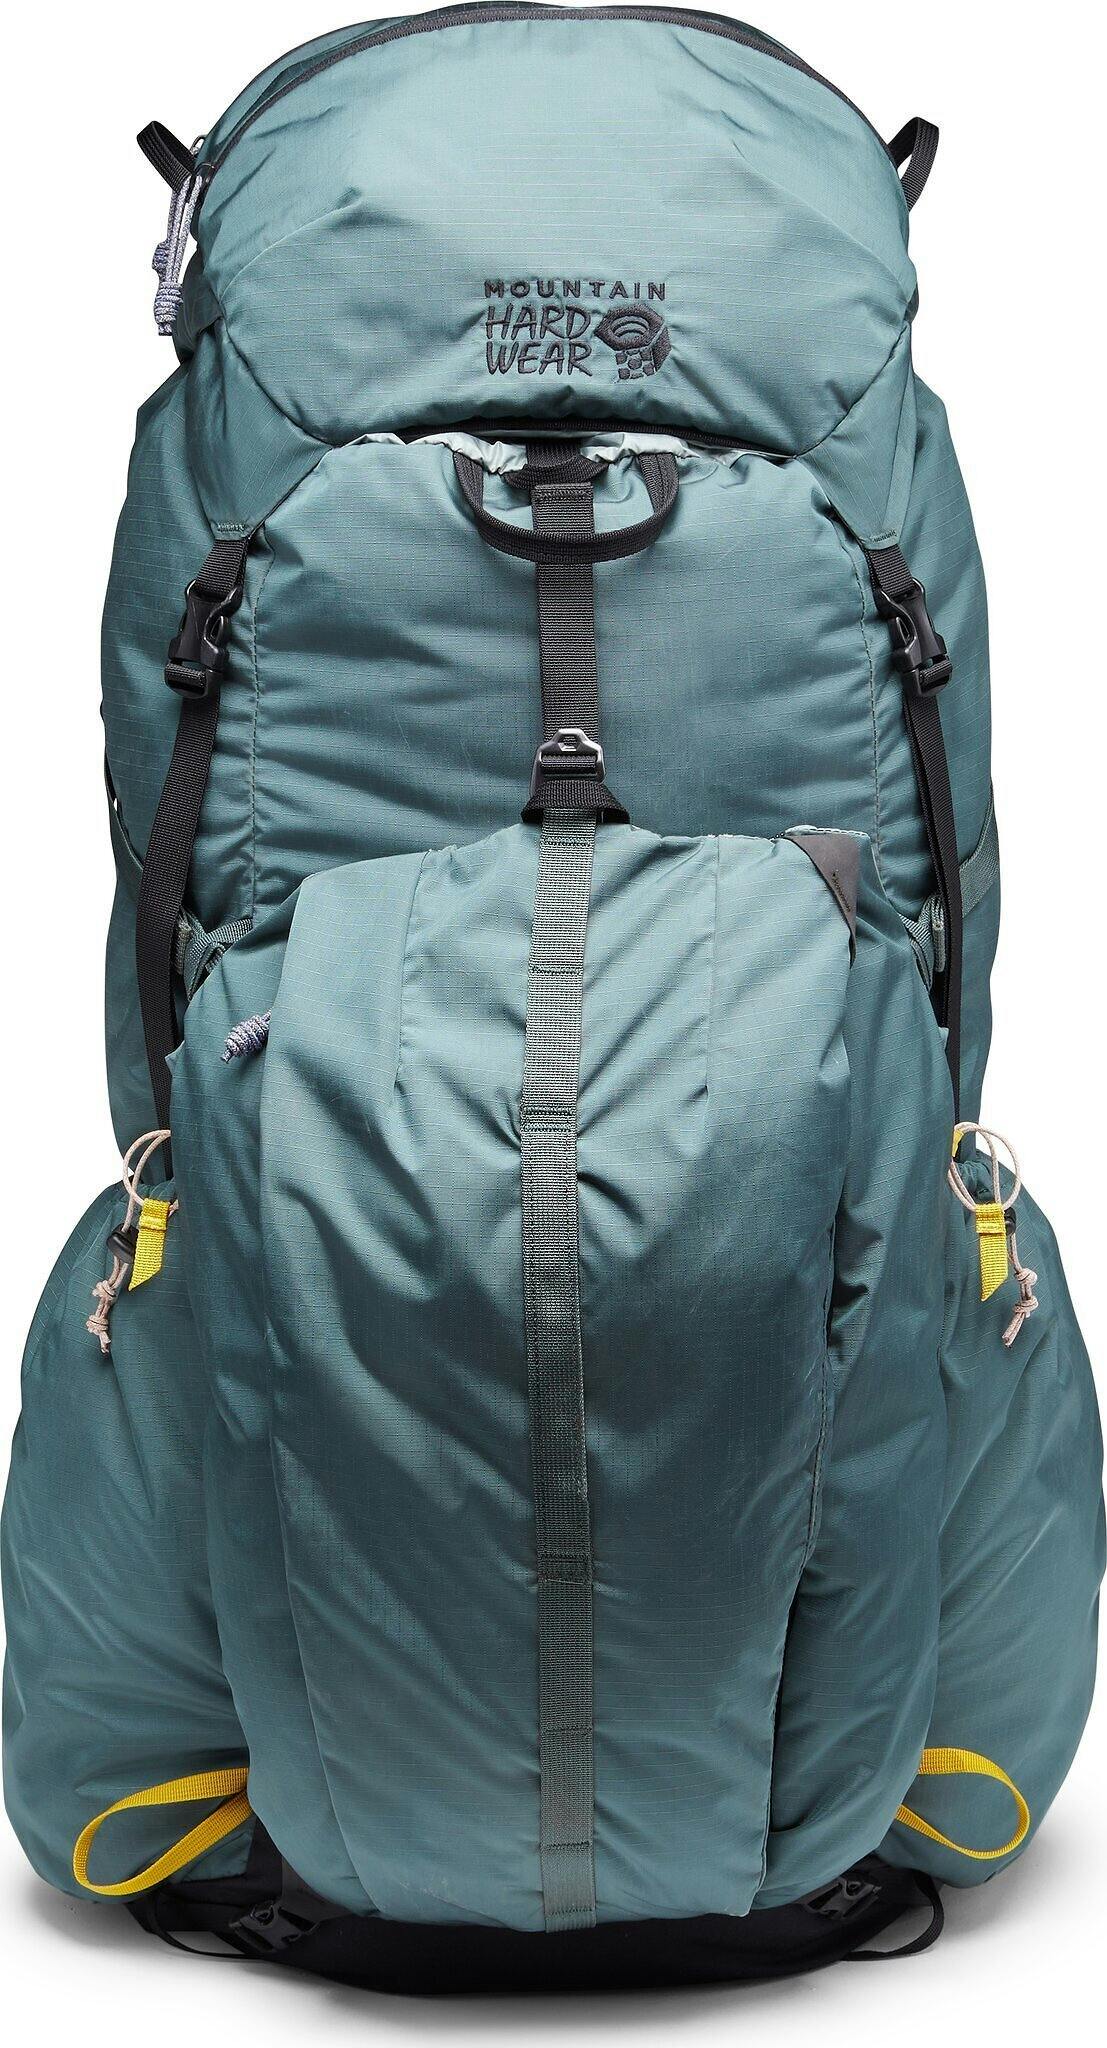 Product image for PCT Backpack 70L